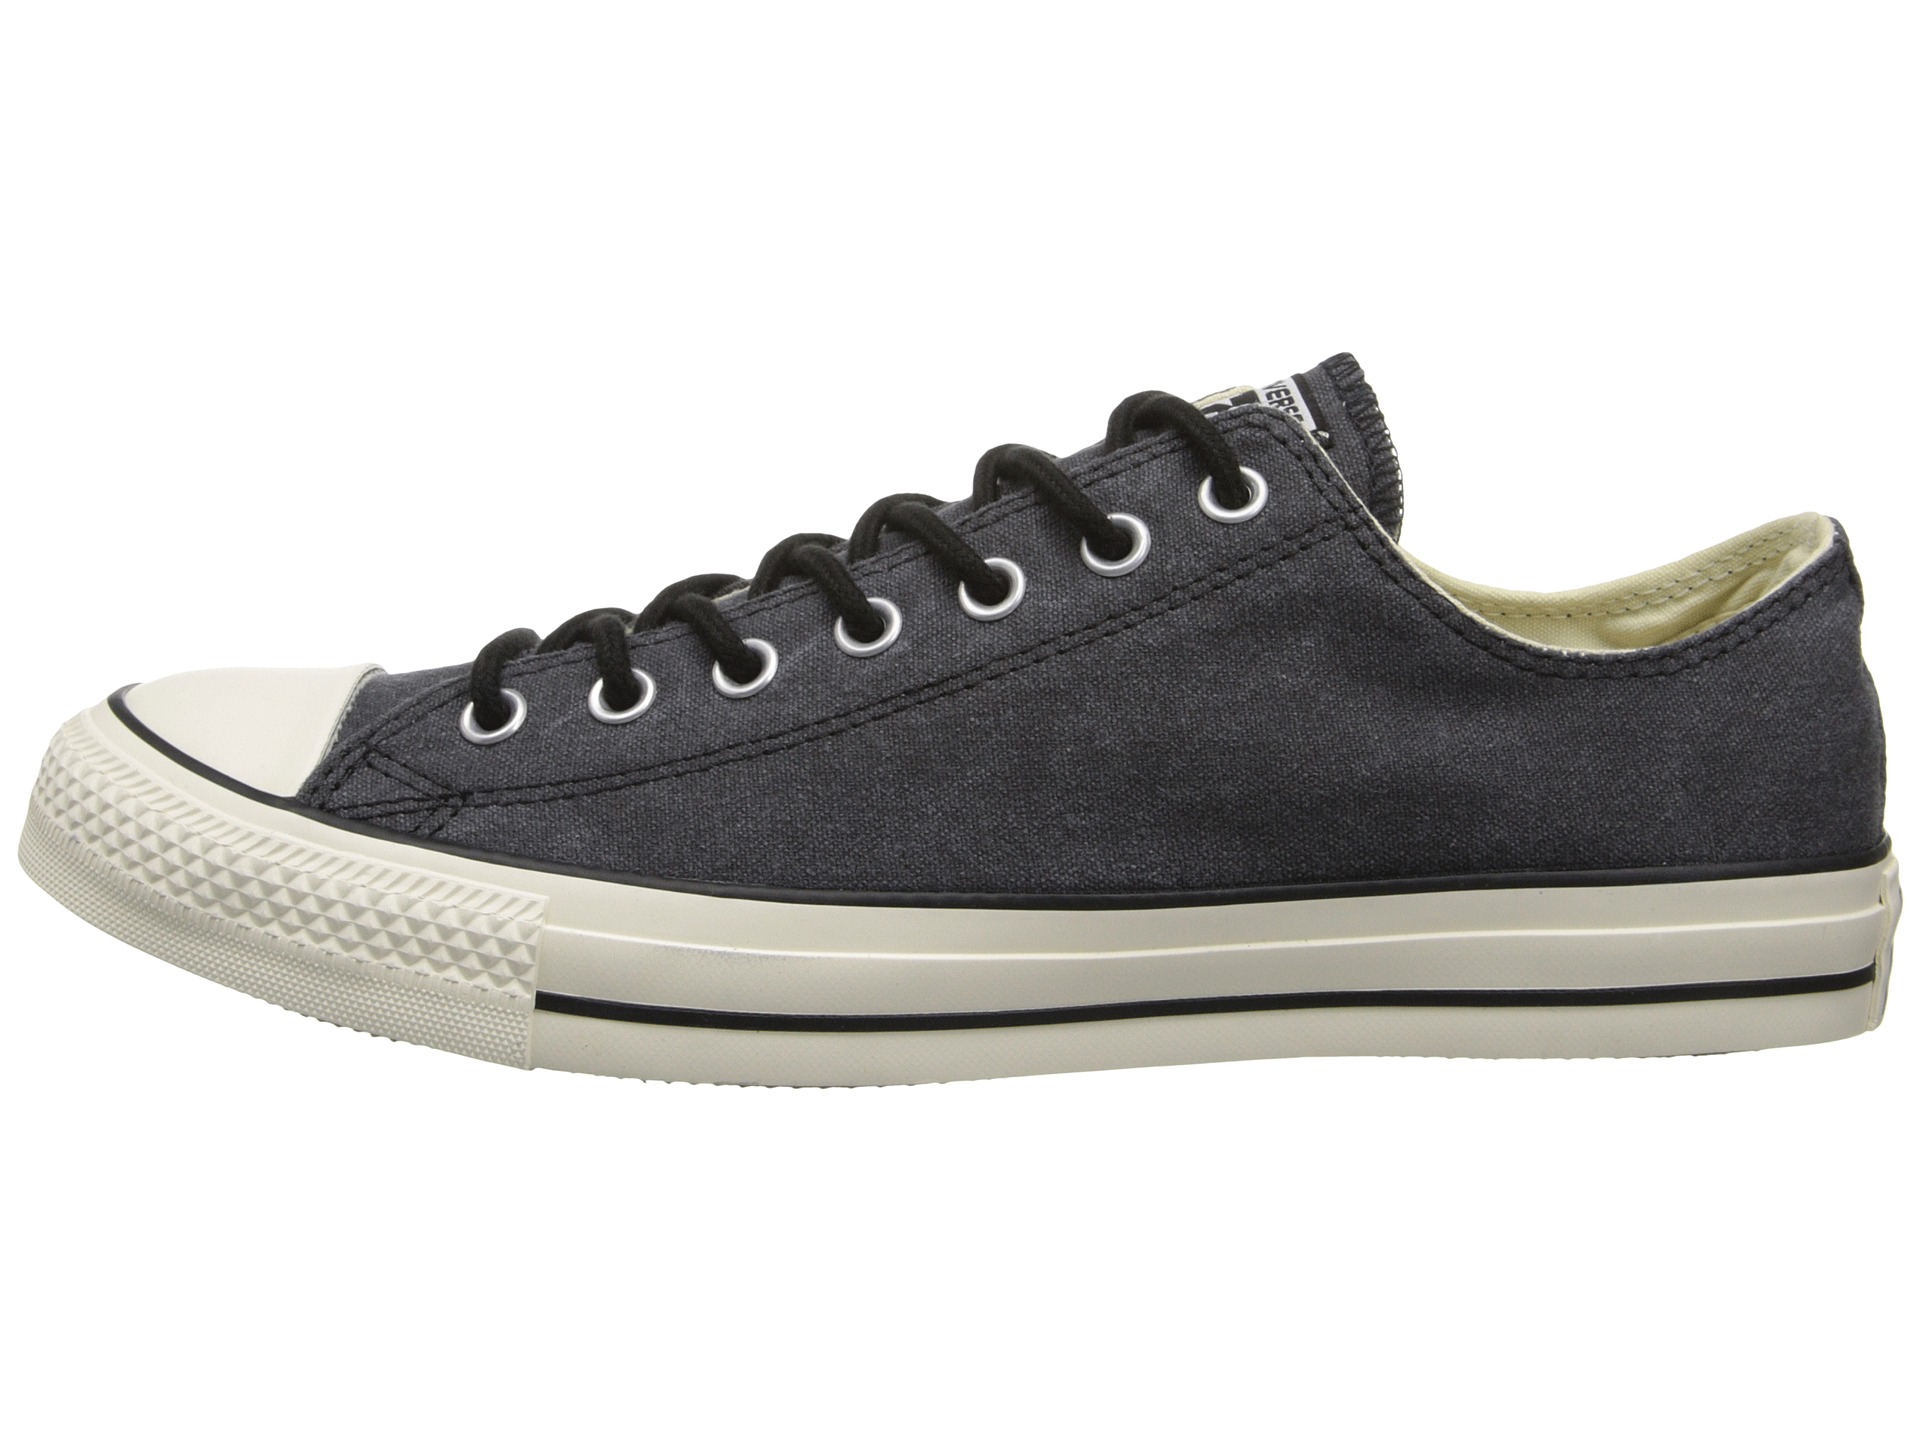 Converse Chuck Taylor All Star Washed Canvas Ox Black | Shipped Free at ...